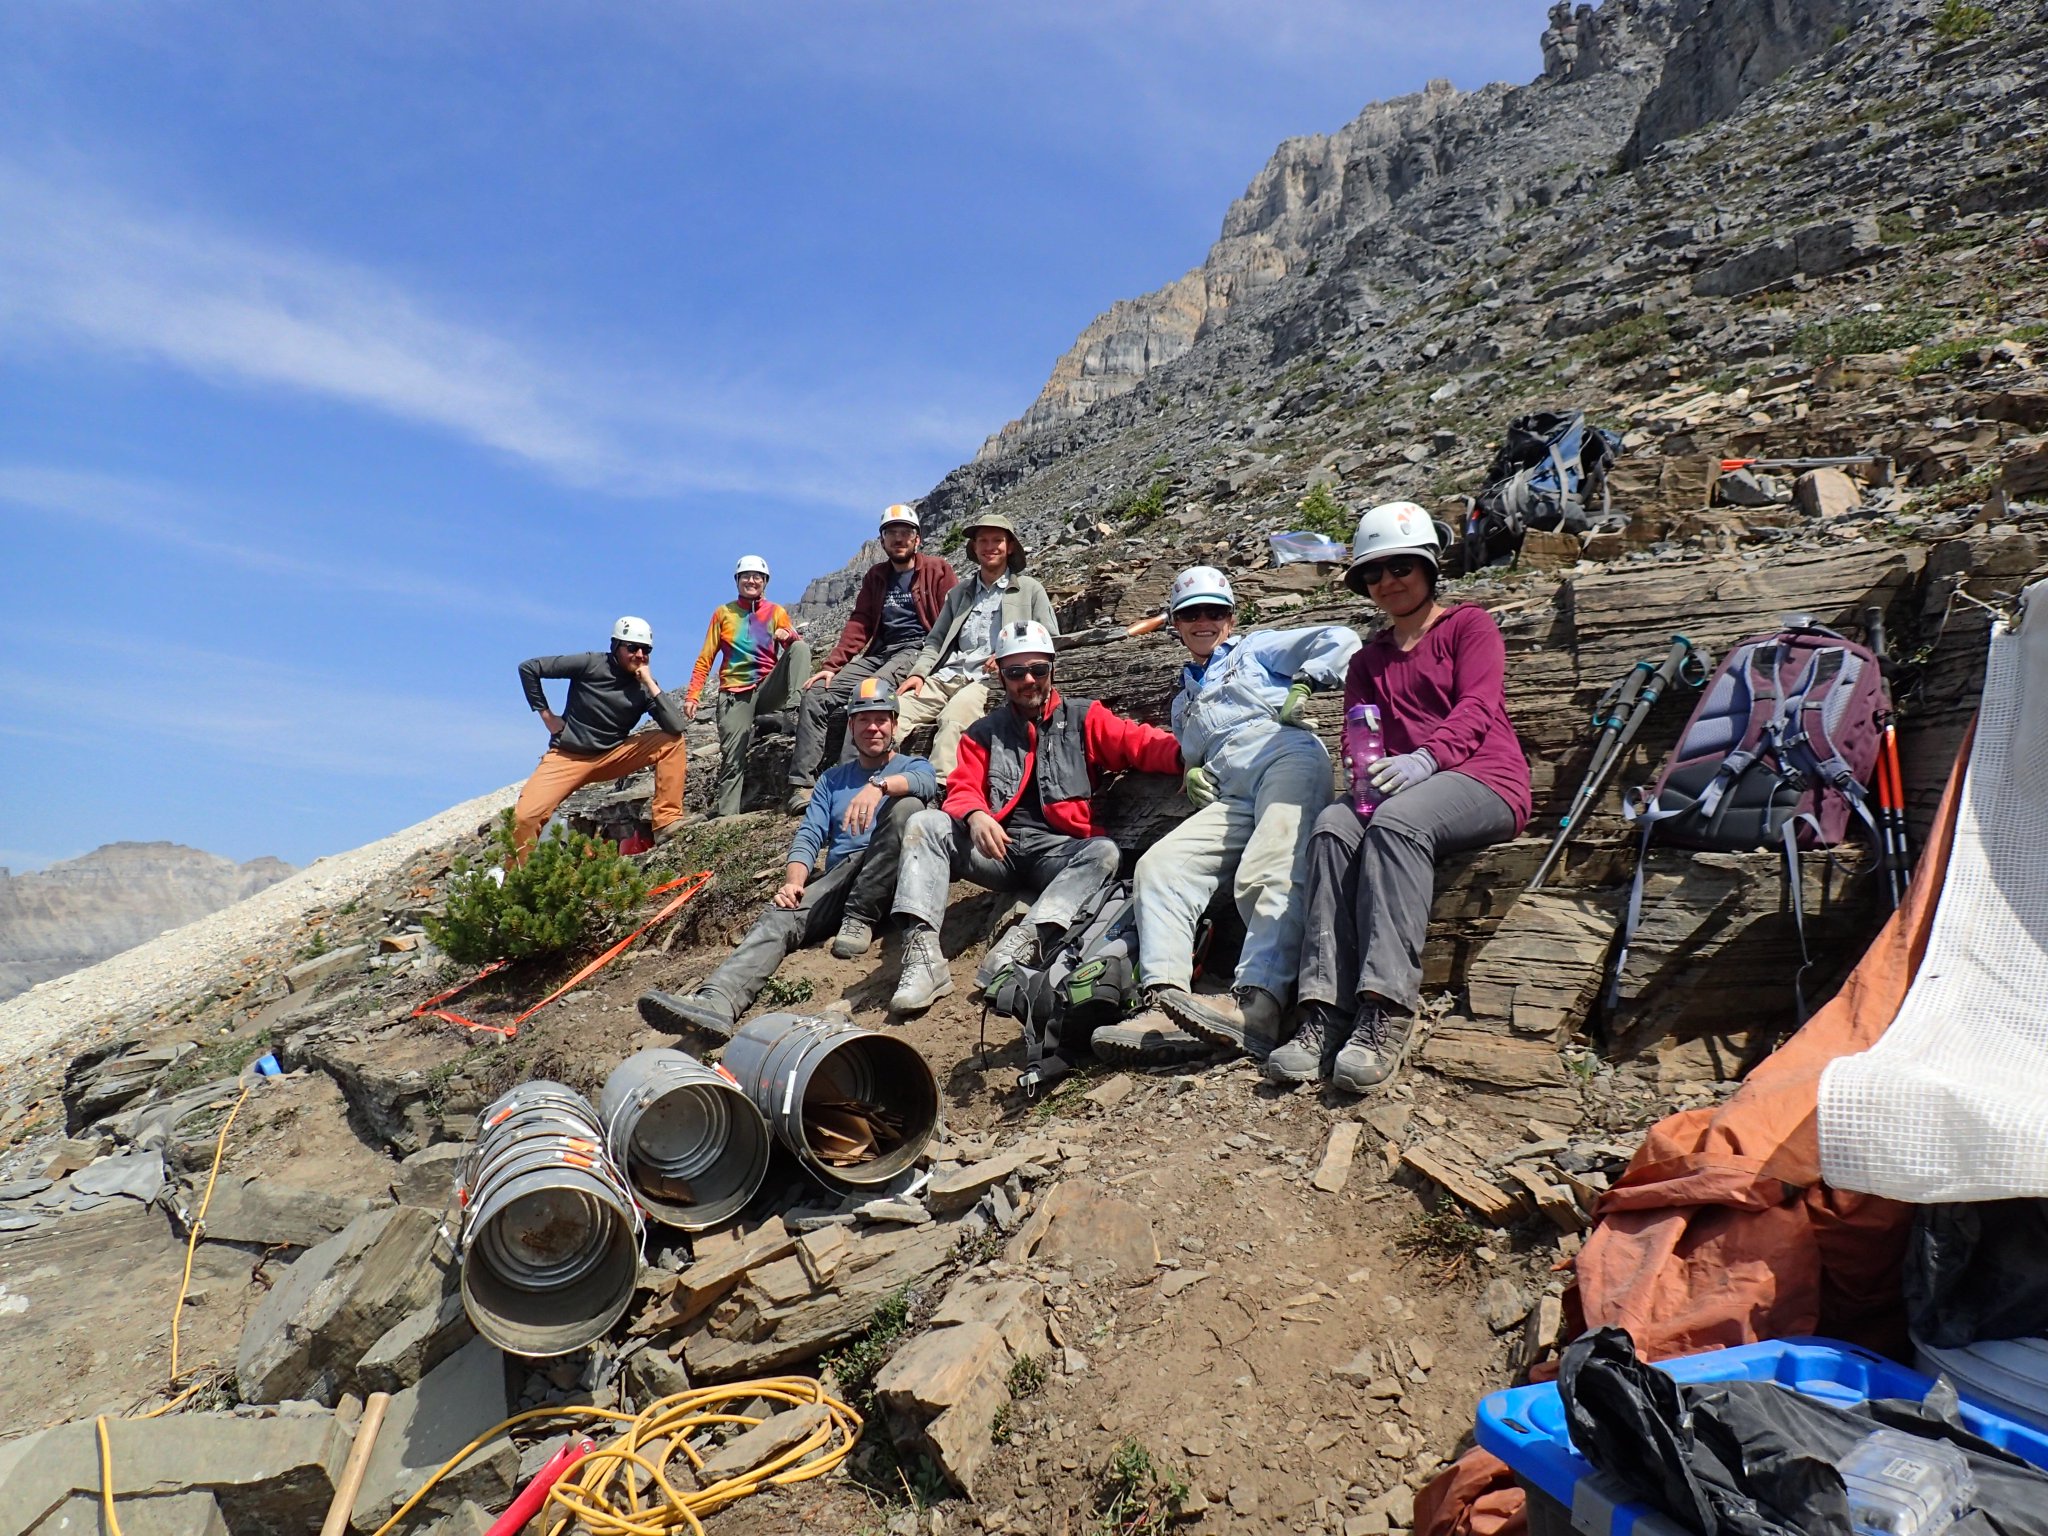 A group of seven people with equipment posing on a hill in the Burgess Shale